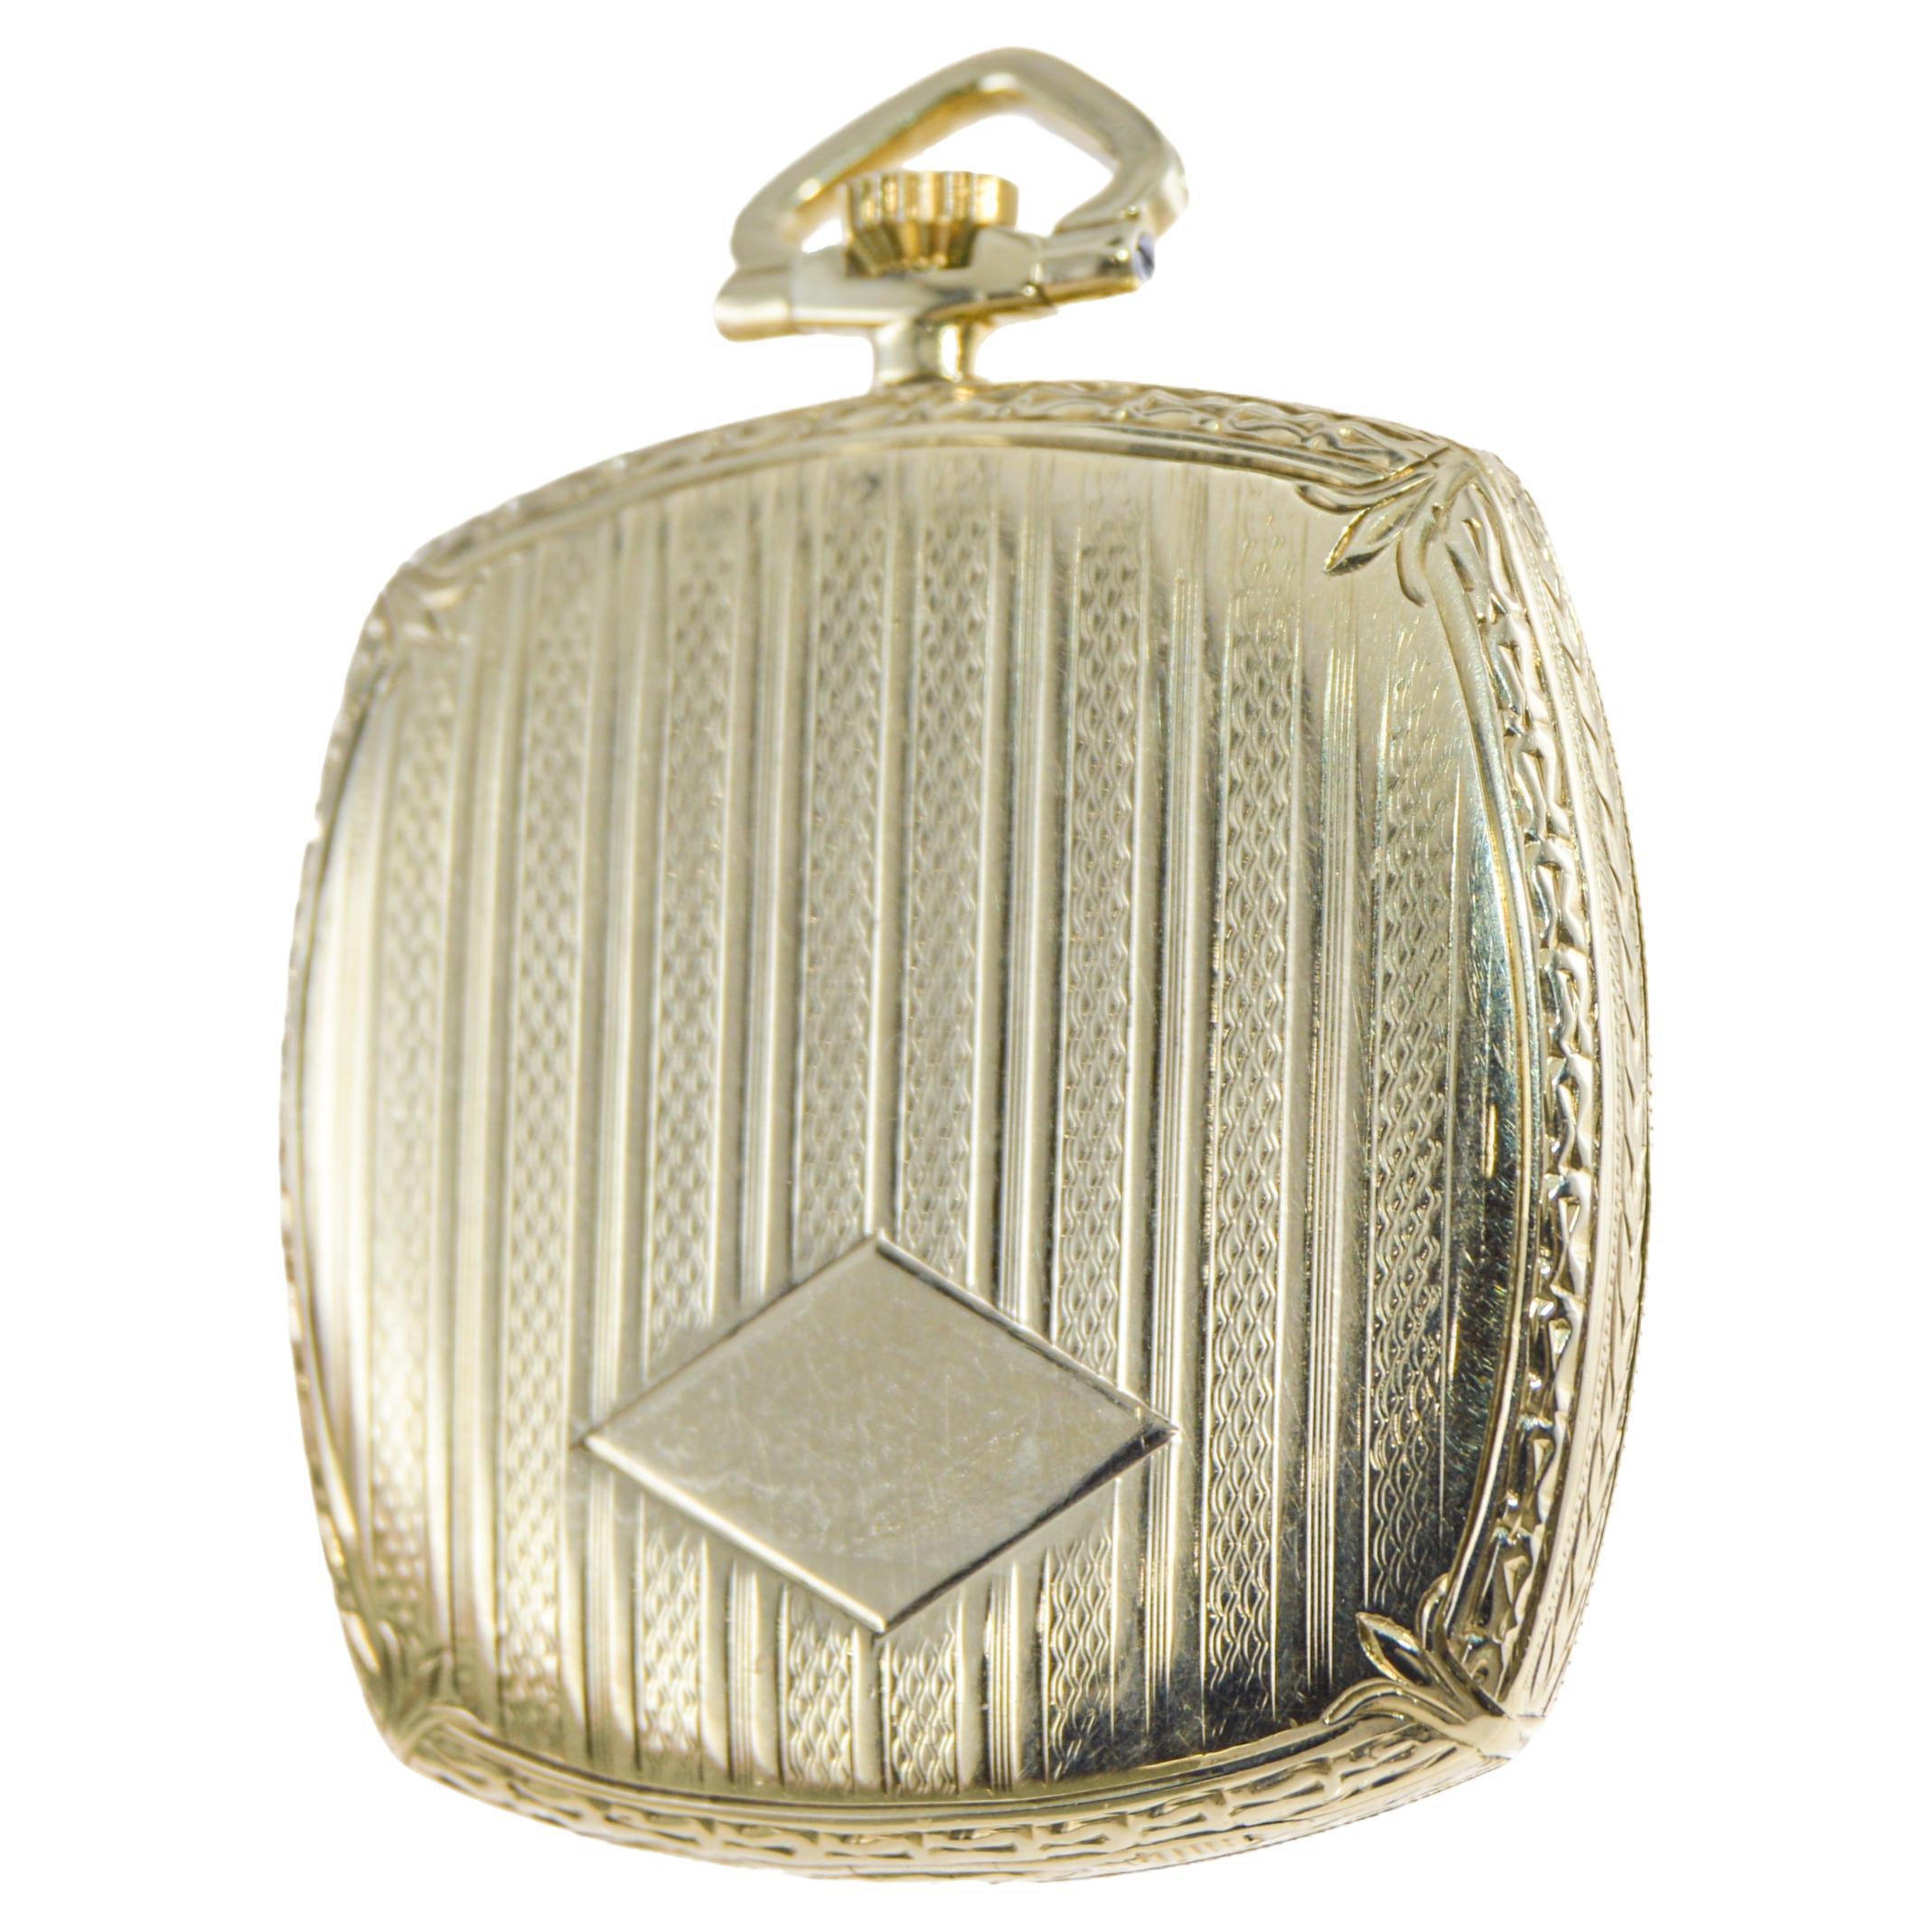 Black Starr & Frost 14 Karat Gold Art Deco Pocket Watch with Engraved Dial  For Sale 8